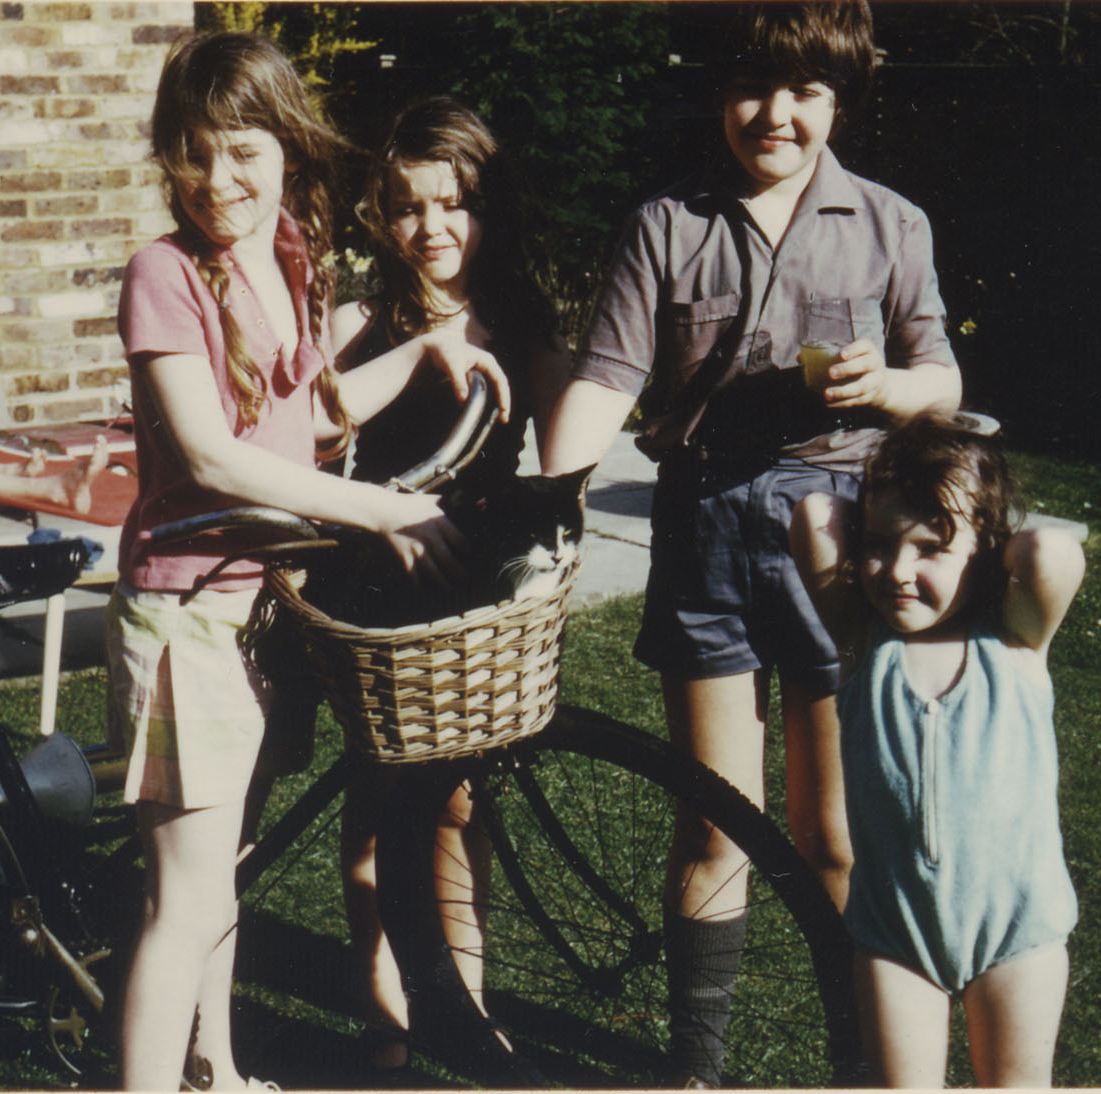 Here is my cat C1973. In a basket. I’m the one holding the bicycle